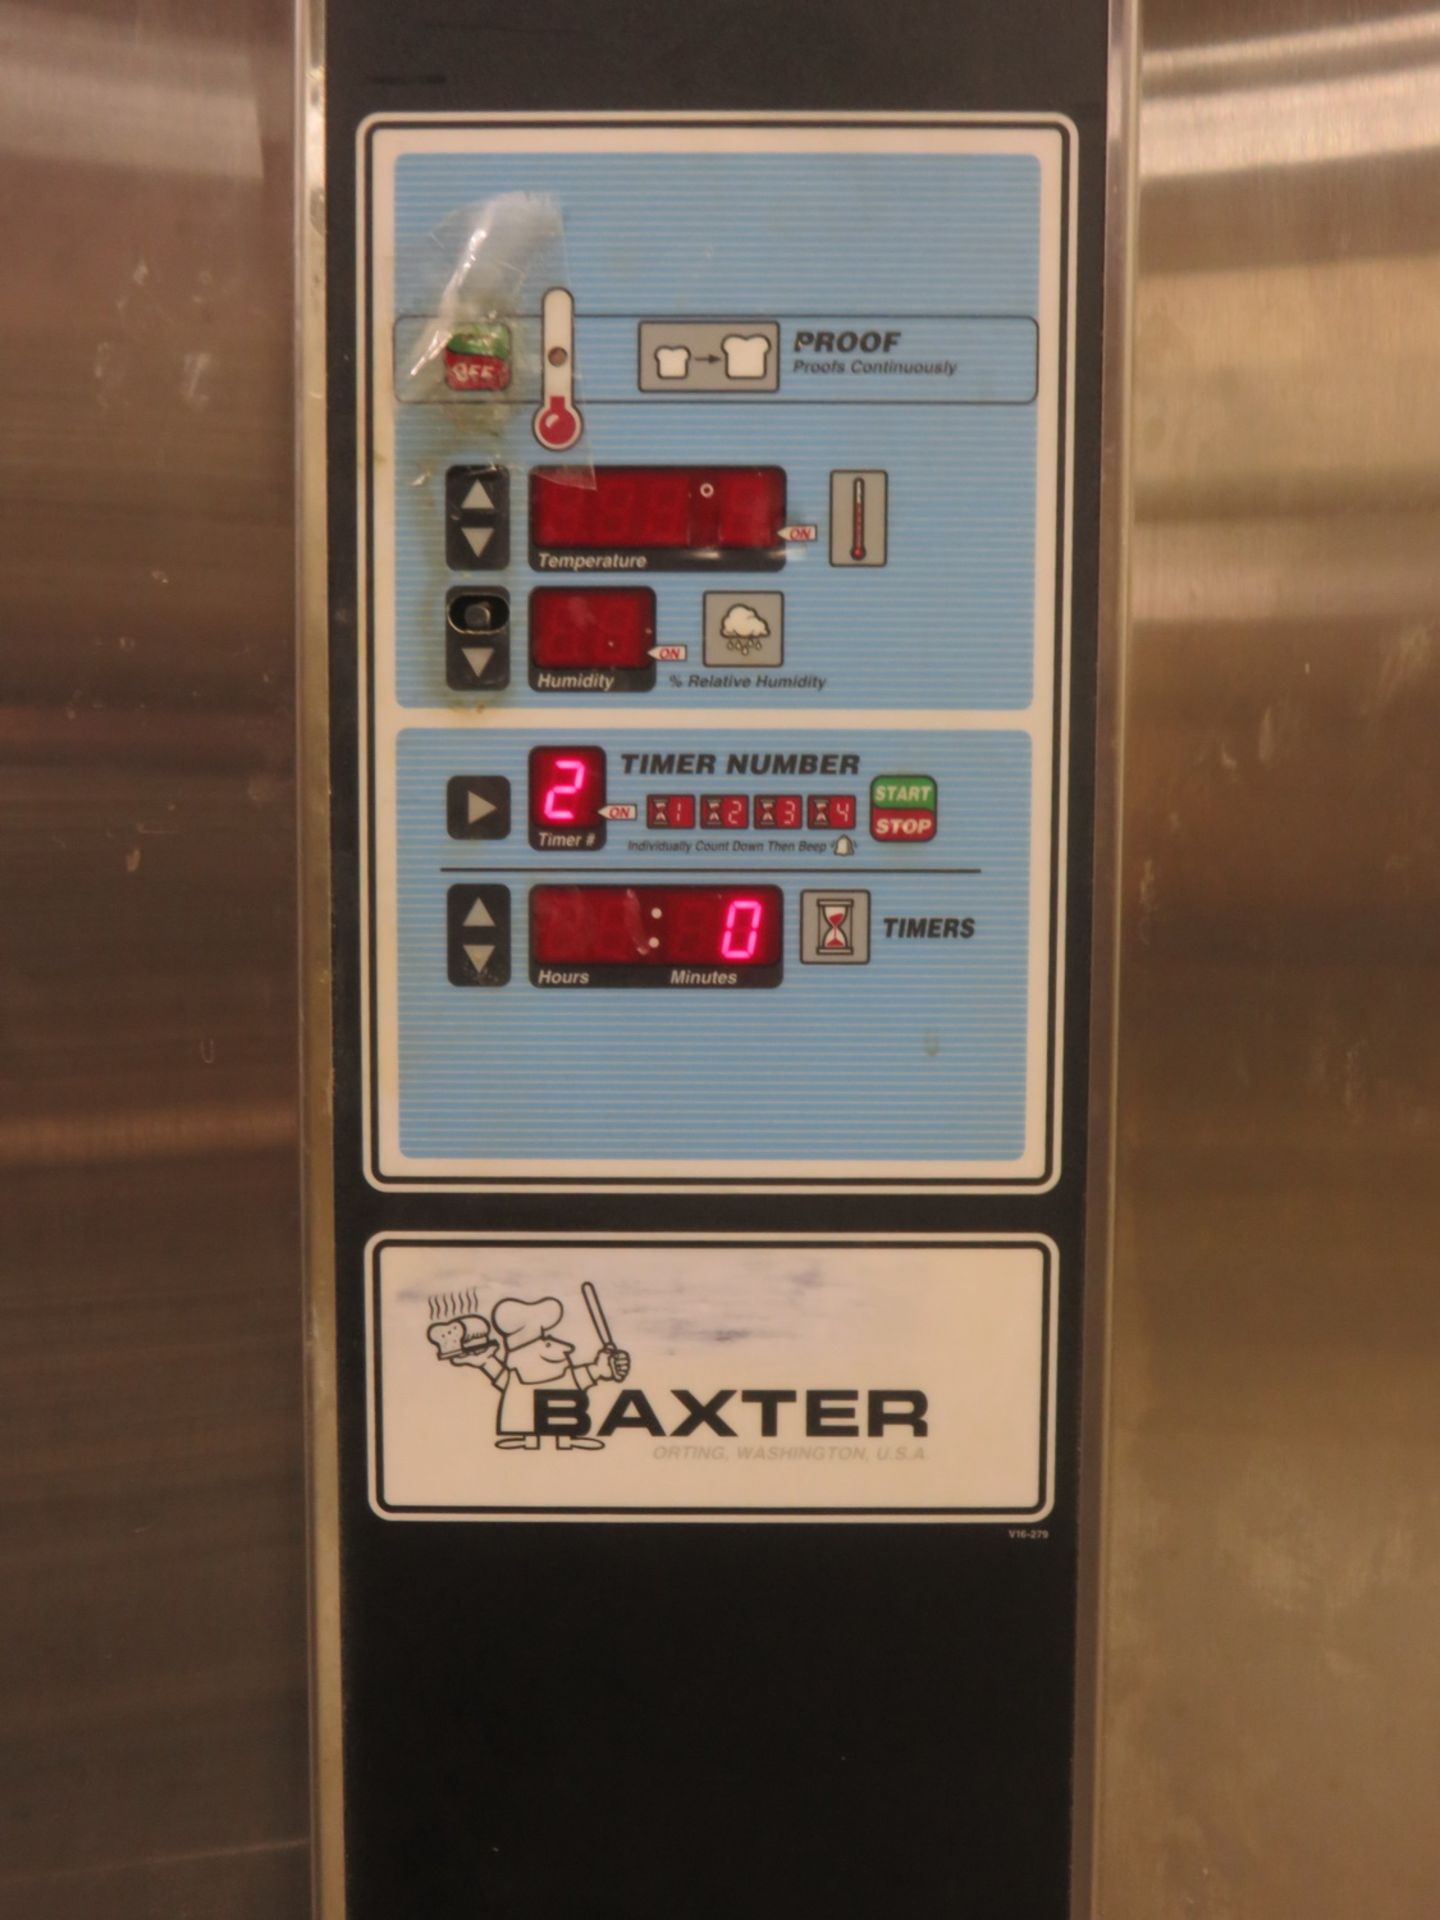 BAXTER PC-200-M118/PC200P-16 APPROX. 68" X 150" X 77"H 4-DOOR ROLL-IN PROOFER, S/N 24-1003498 - Image 3 of 3